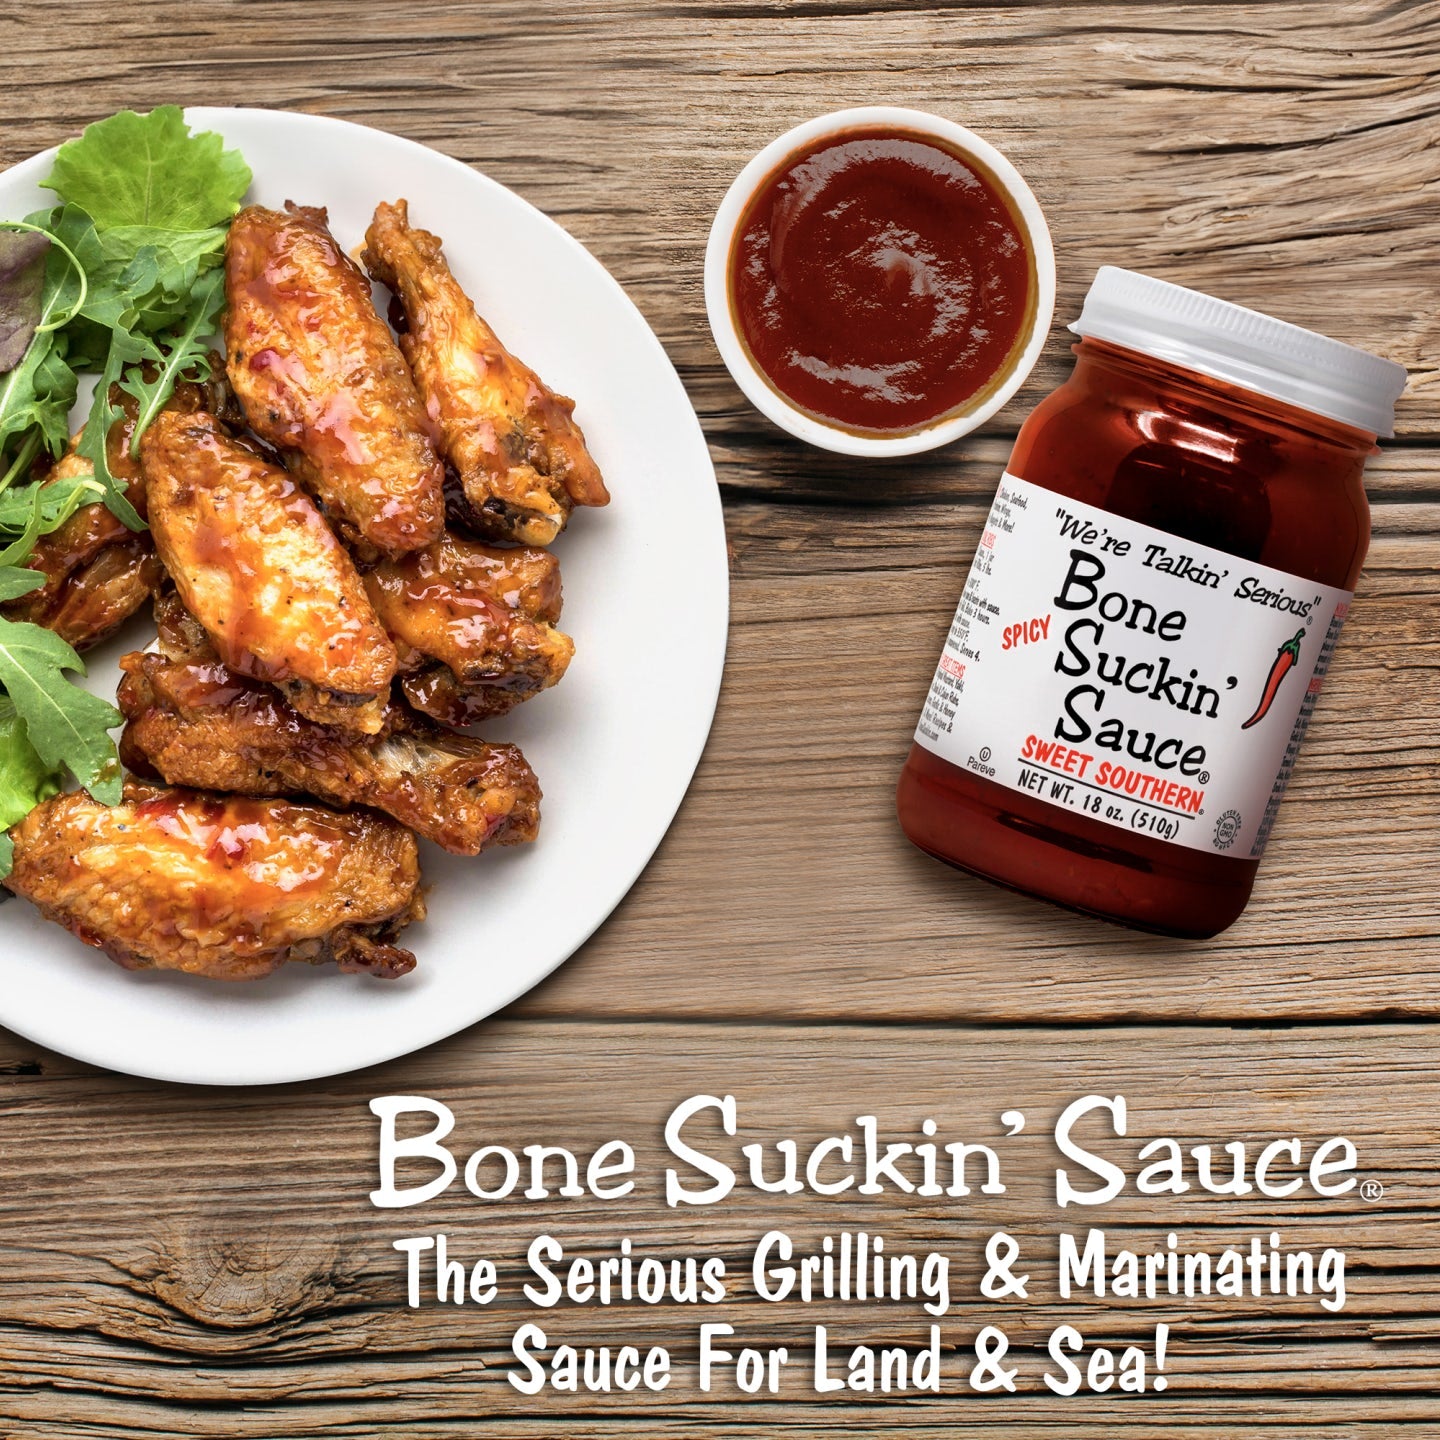 Bone Suckin' Sauce Sweet Southern Spicy BBQ Sauce - 18 oz in Glass Bottle, For Ribs, Chicken, Pork, Beef - Gluten-Free, Non-GMO, Kosher, Spicy Barbecue Sauce Sweetened with Cane Sugar & Molasses